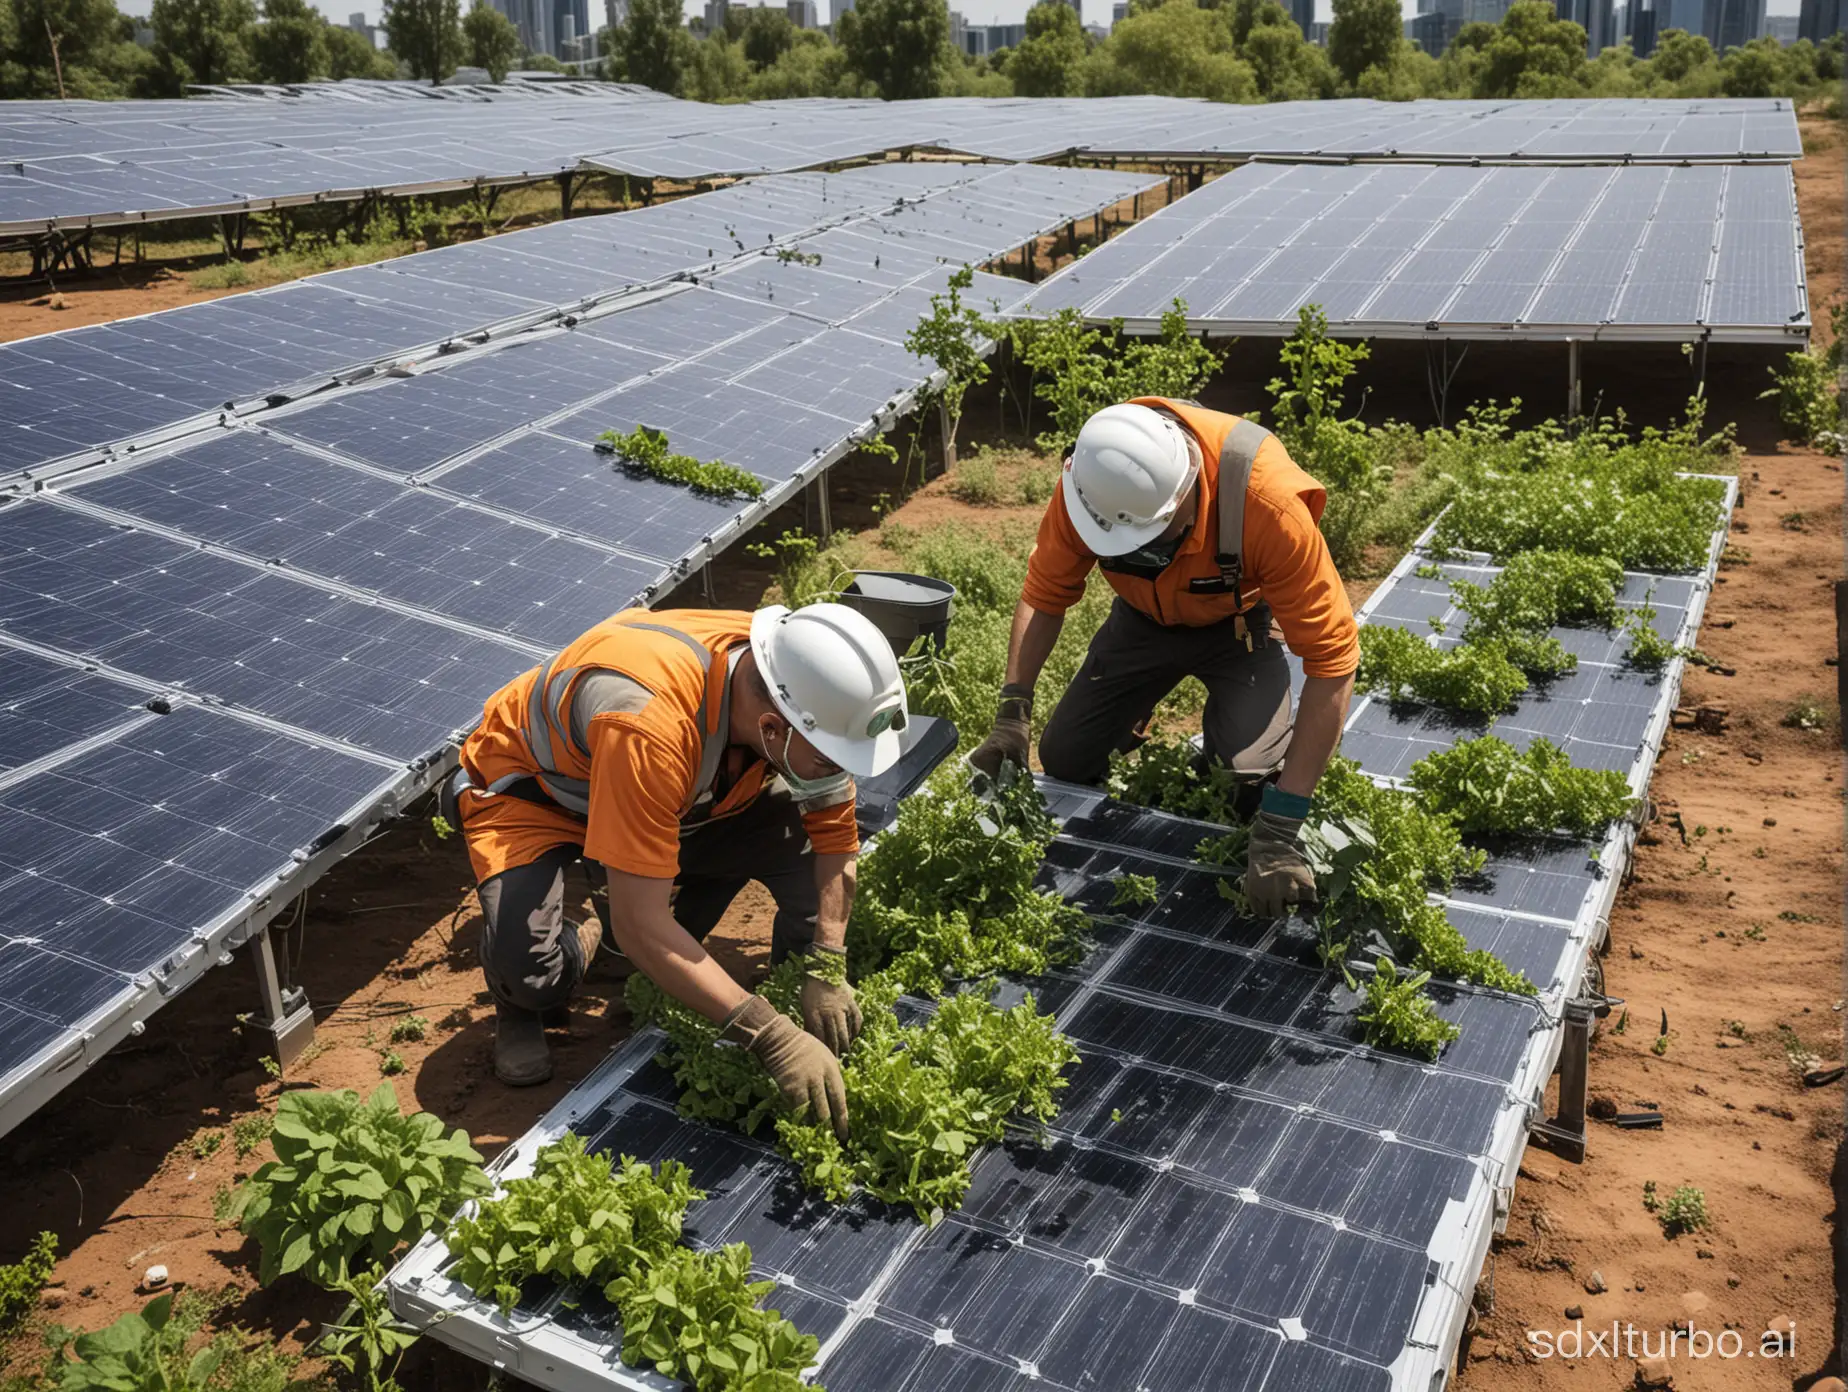 Workers clear greenery away from solar panels in a solarpunk universe